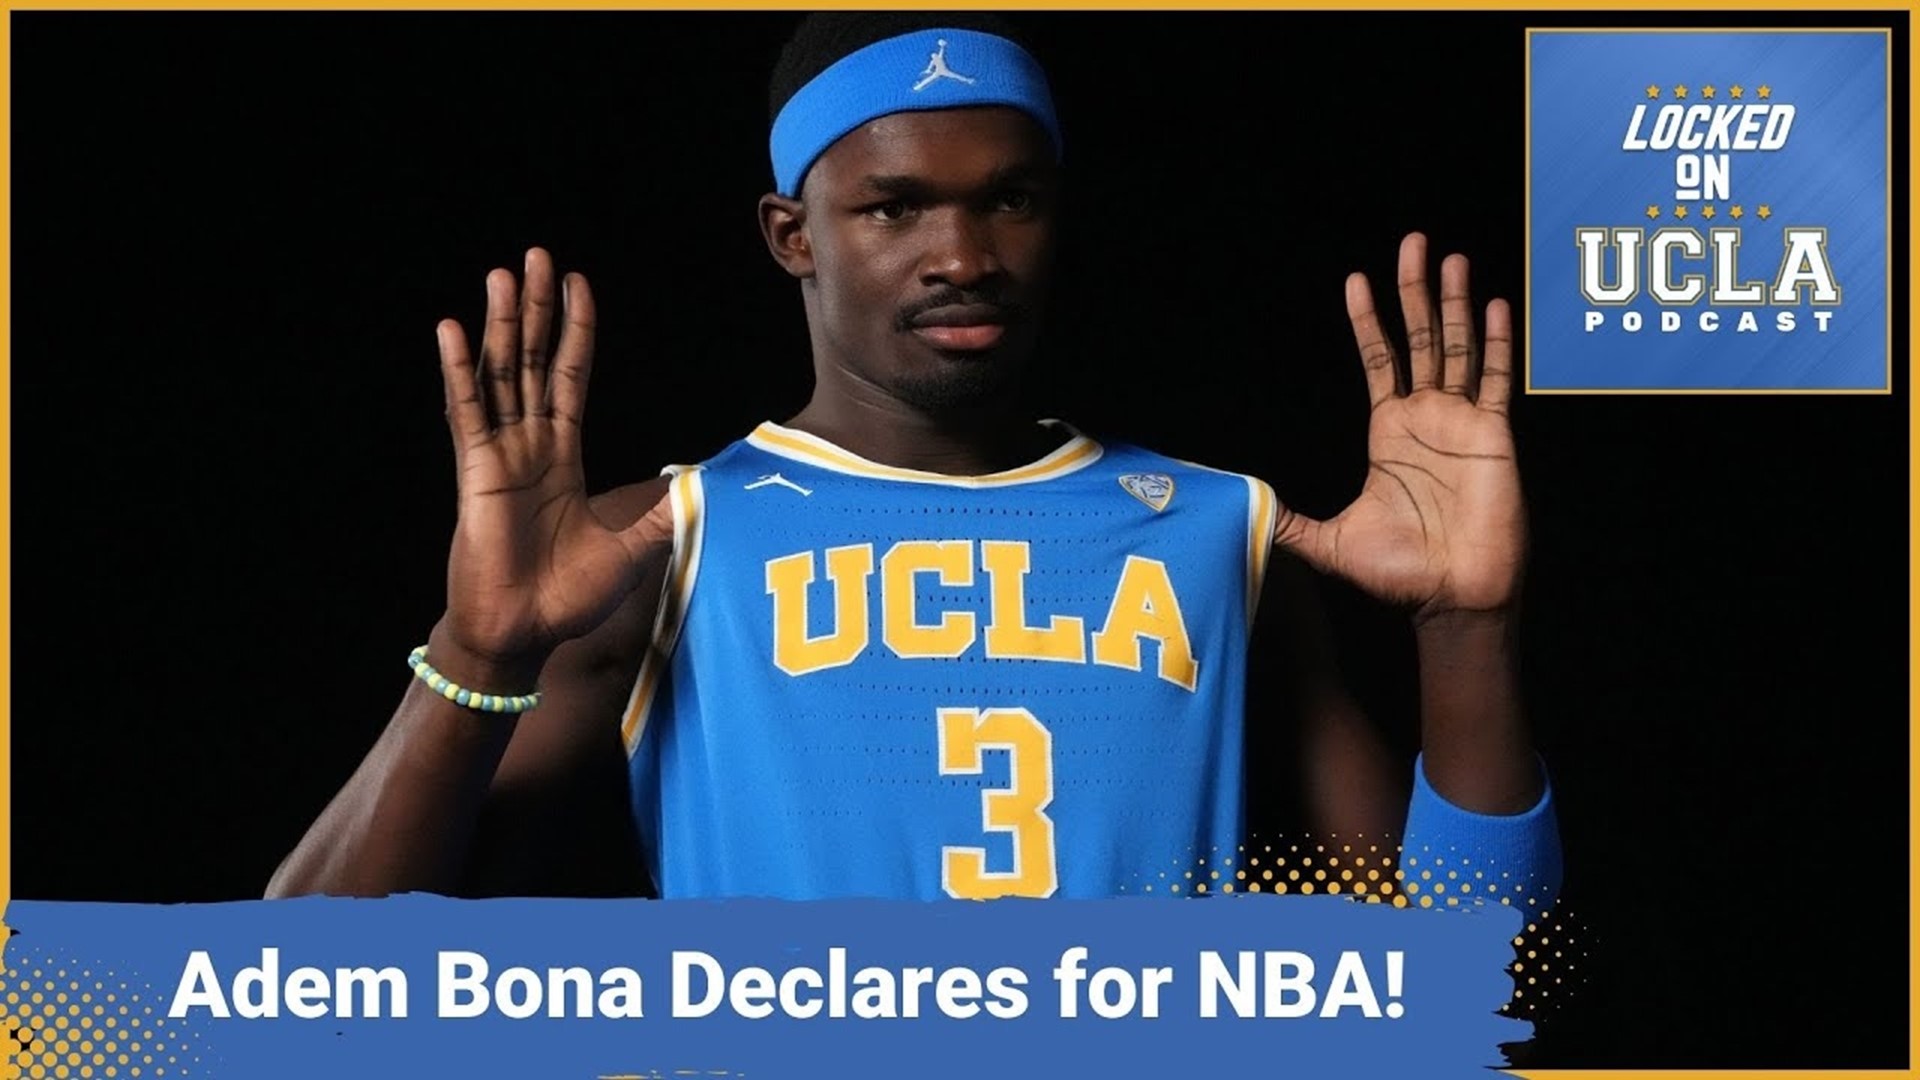 Adem Bona declared for the NBA Draft which leaves Mick Cronin without the reigning Pac-12 Defensive Player of the Year!